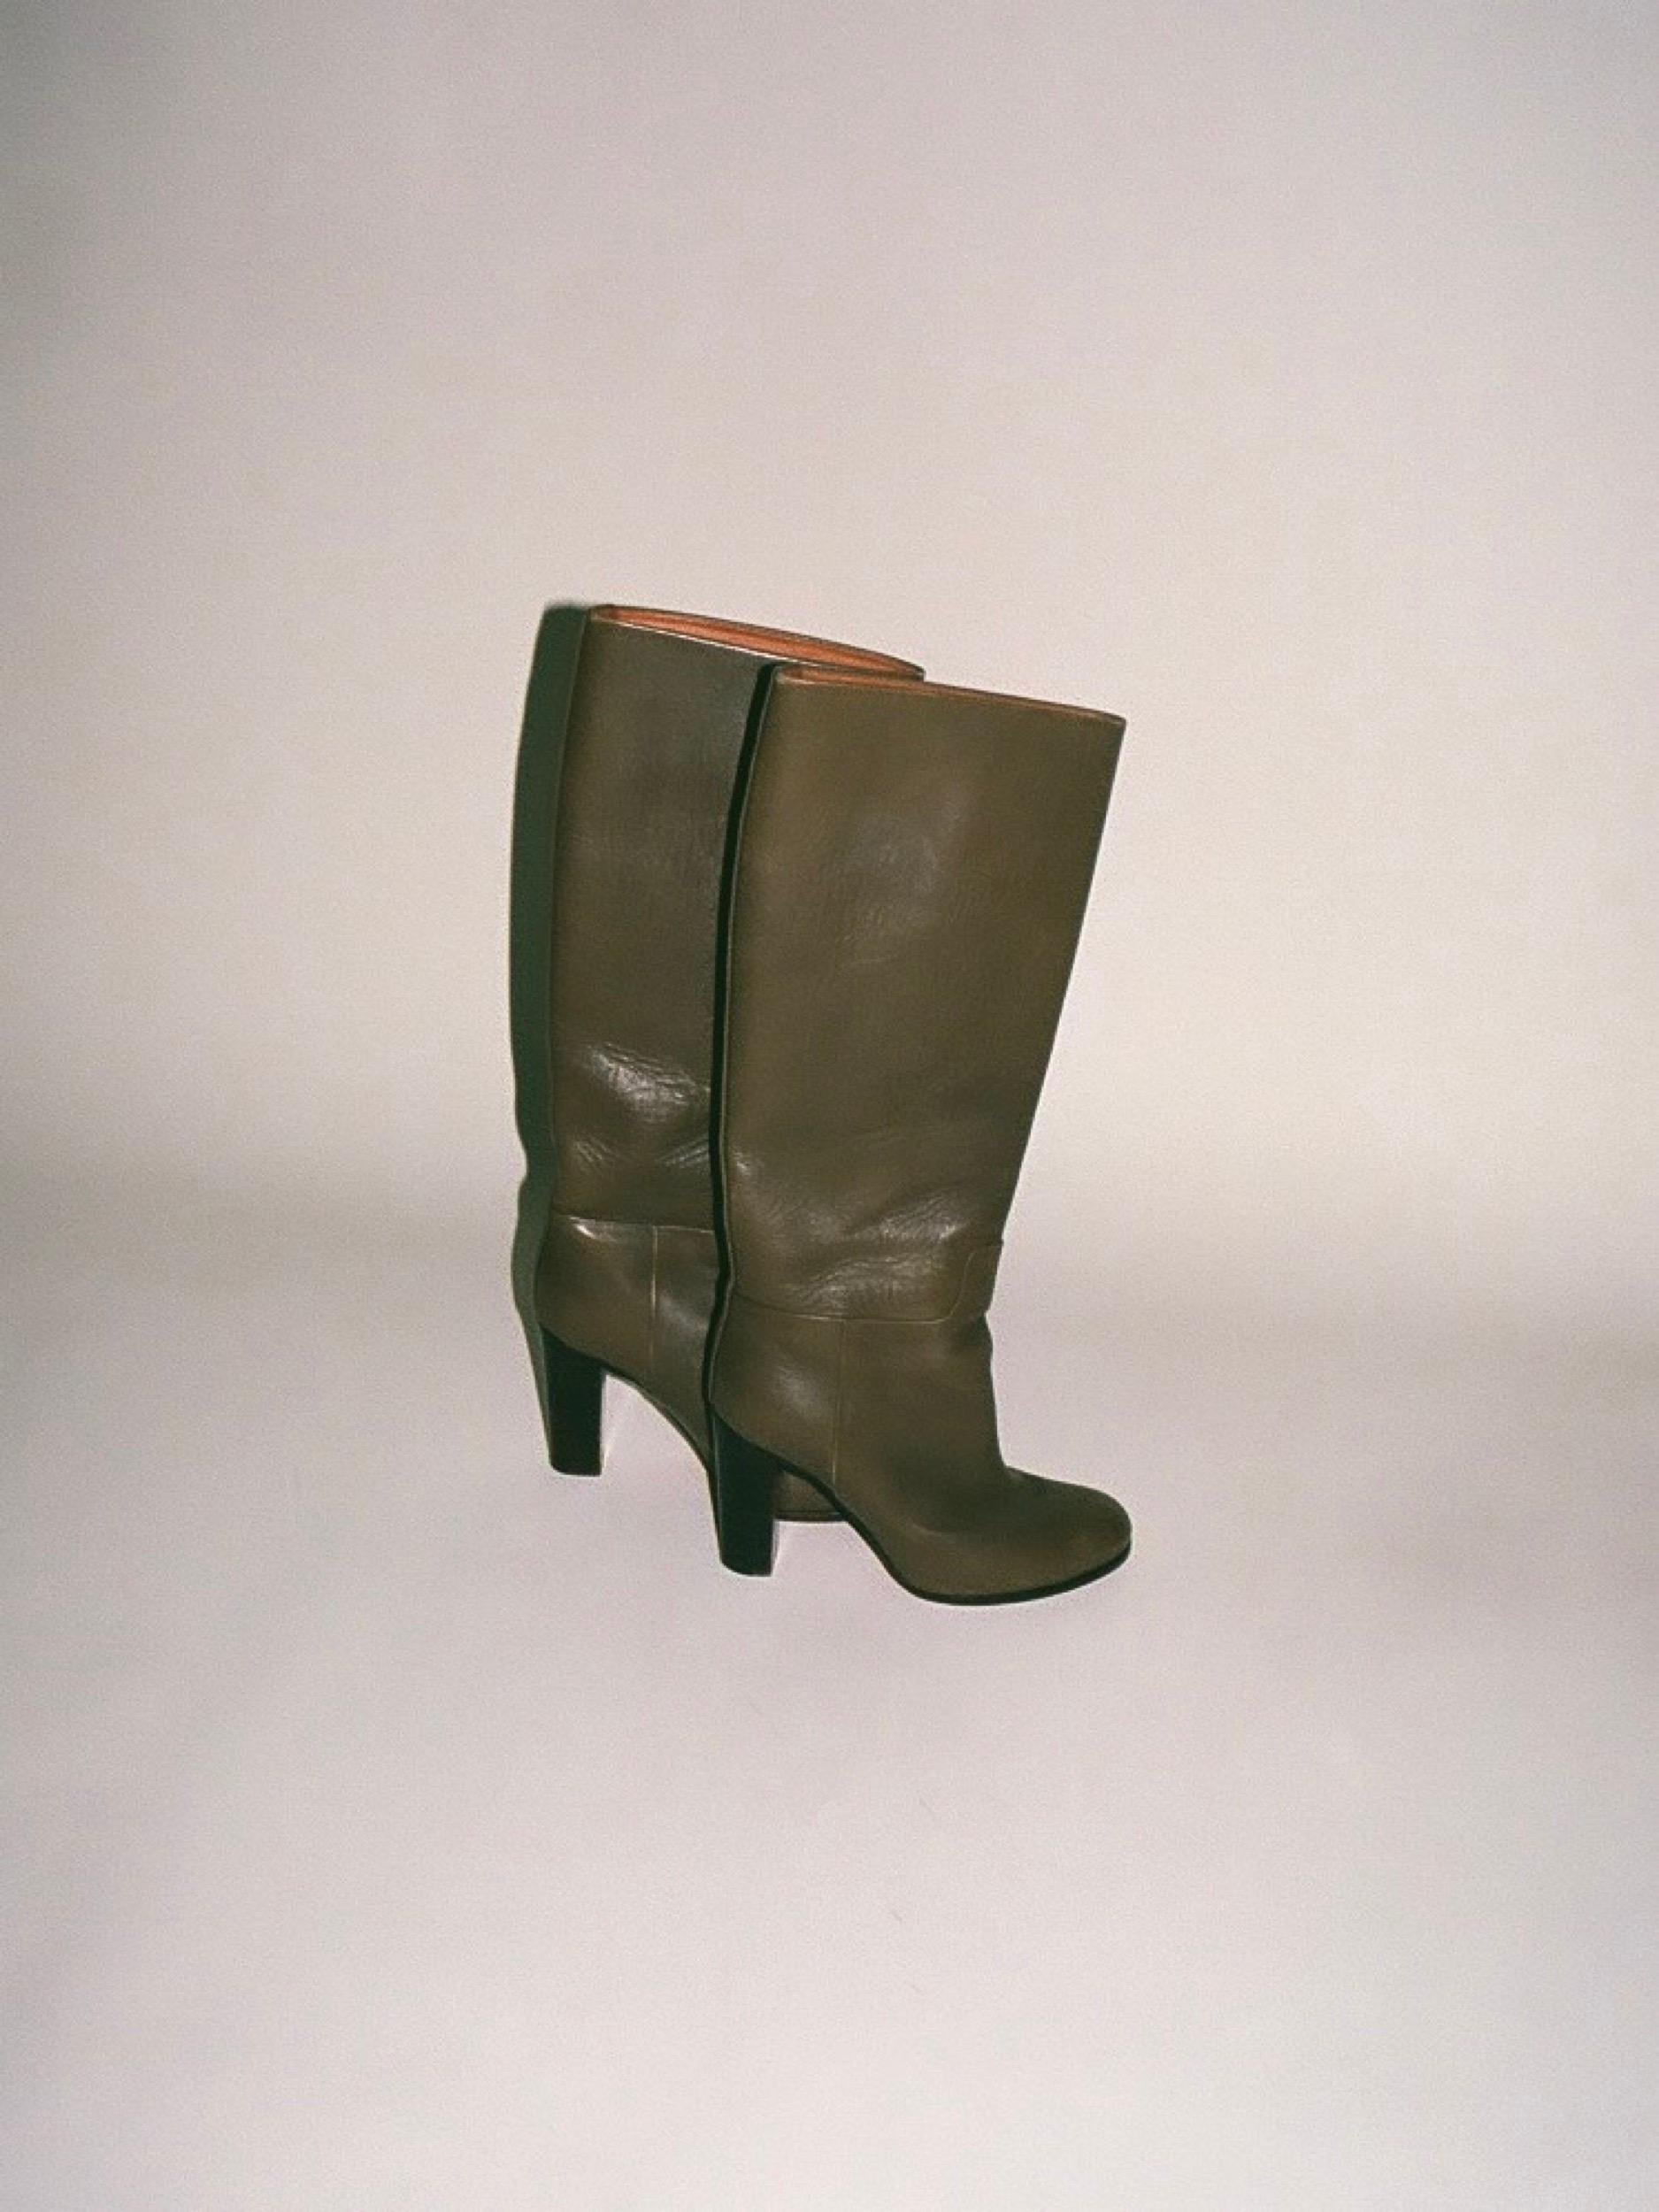 Green Leather Céline Phoebe Philo Knee High Boots 38 In Fair Condition For Sale In Los Angeles, CA